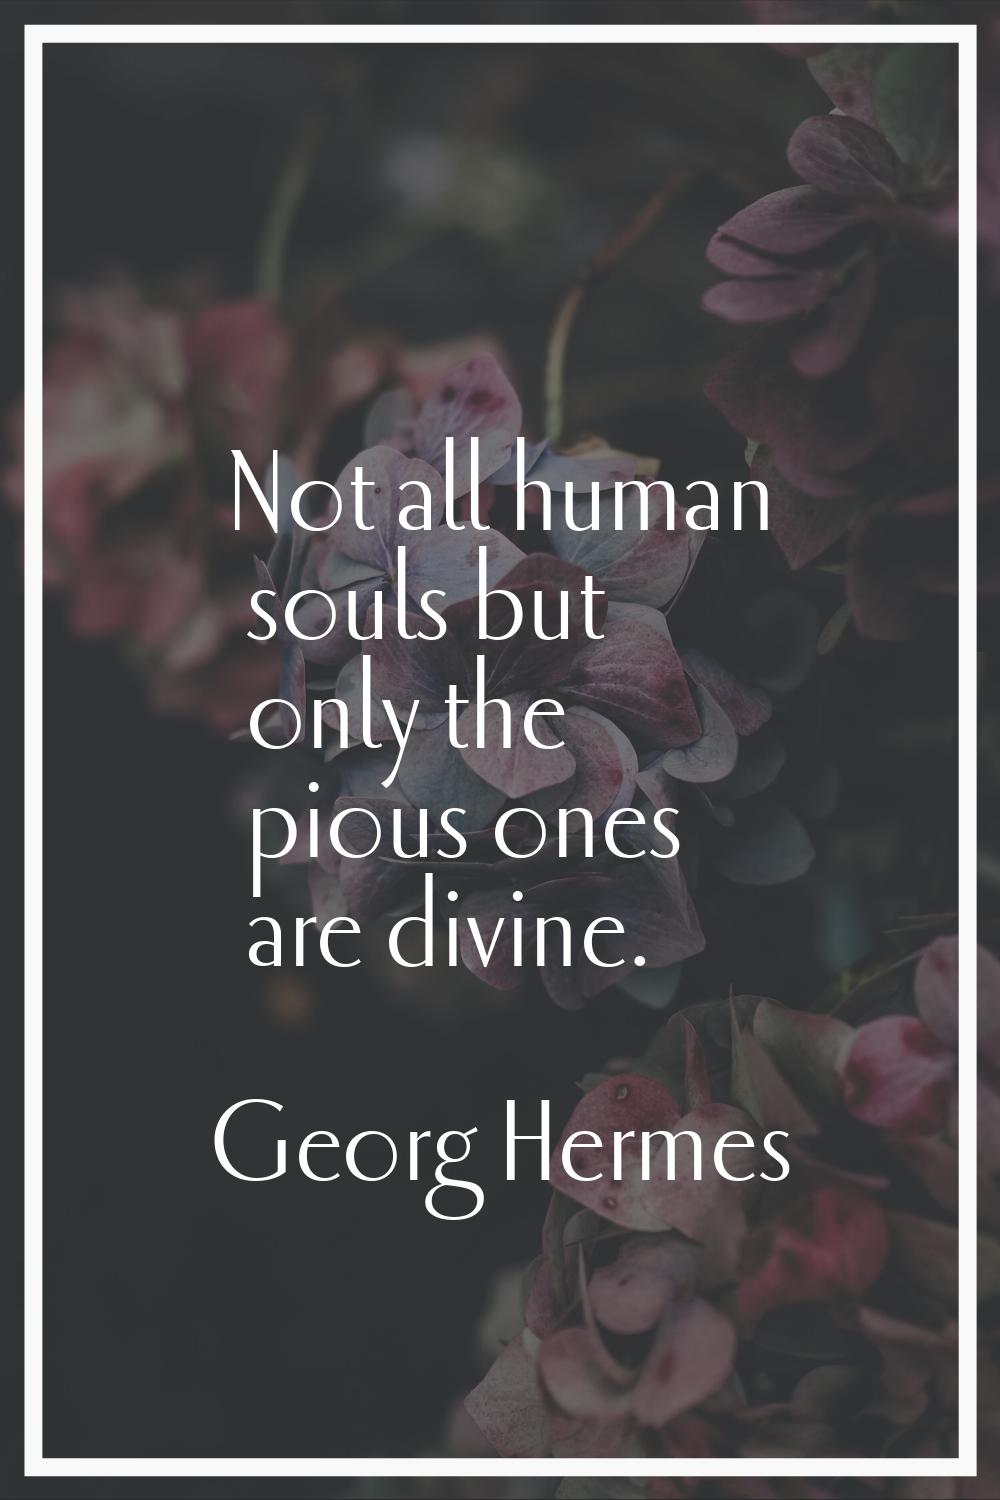 Not all human souls but only the pious ones are divine.